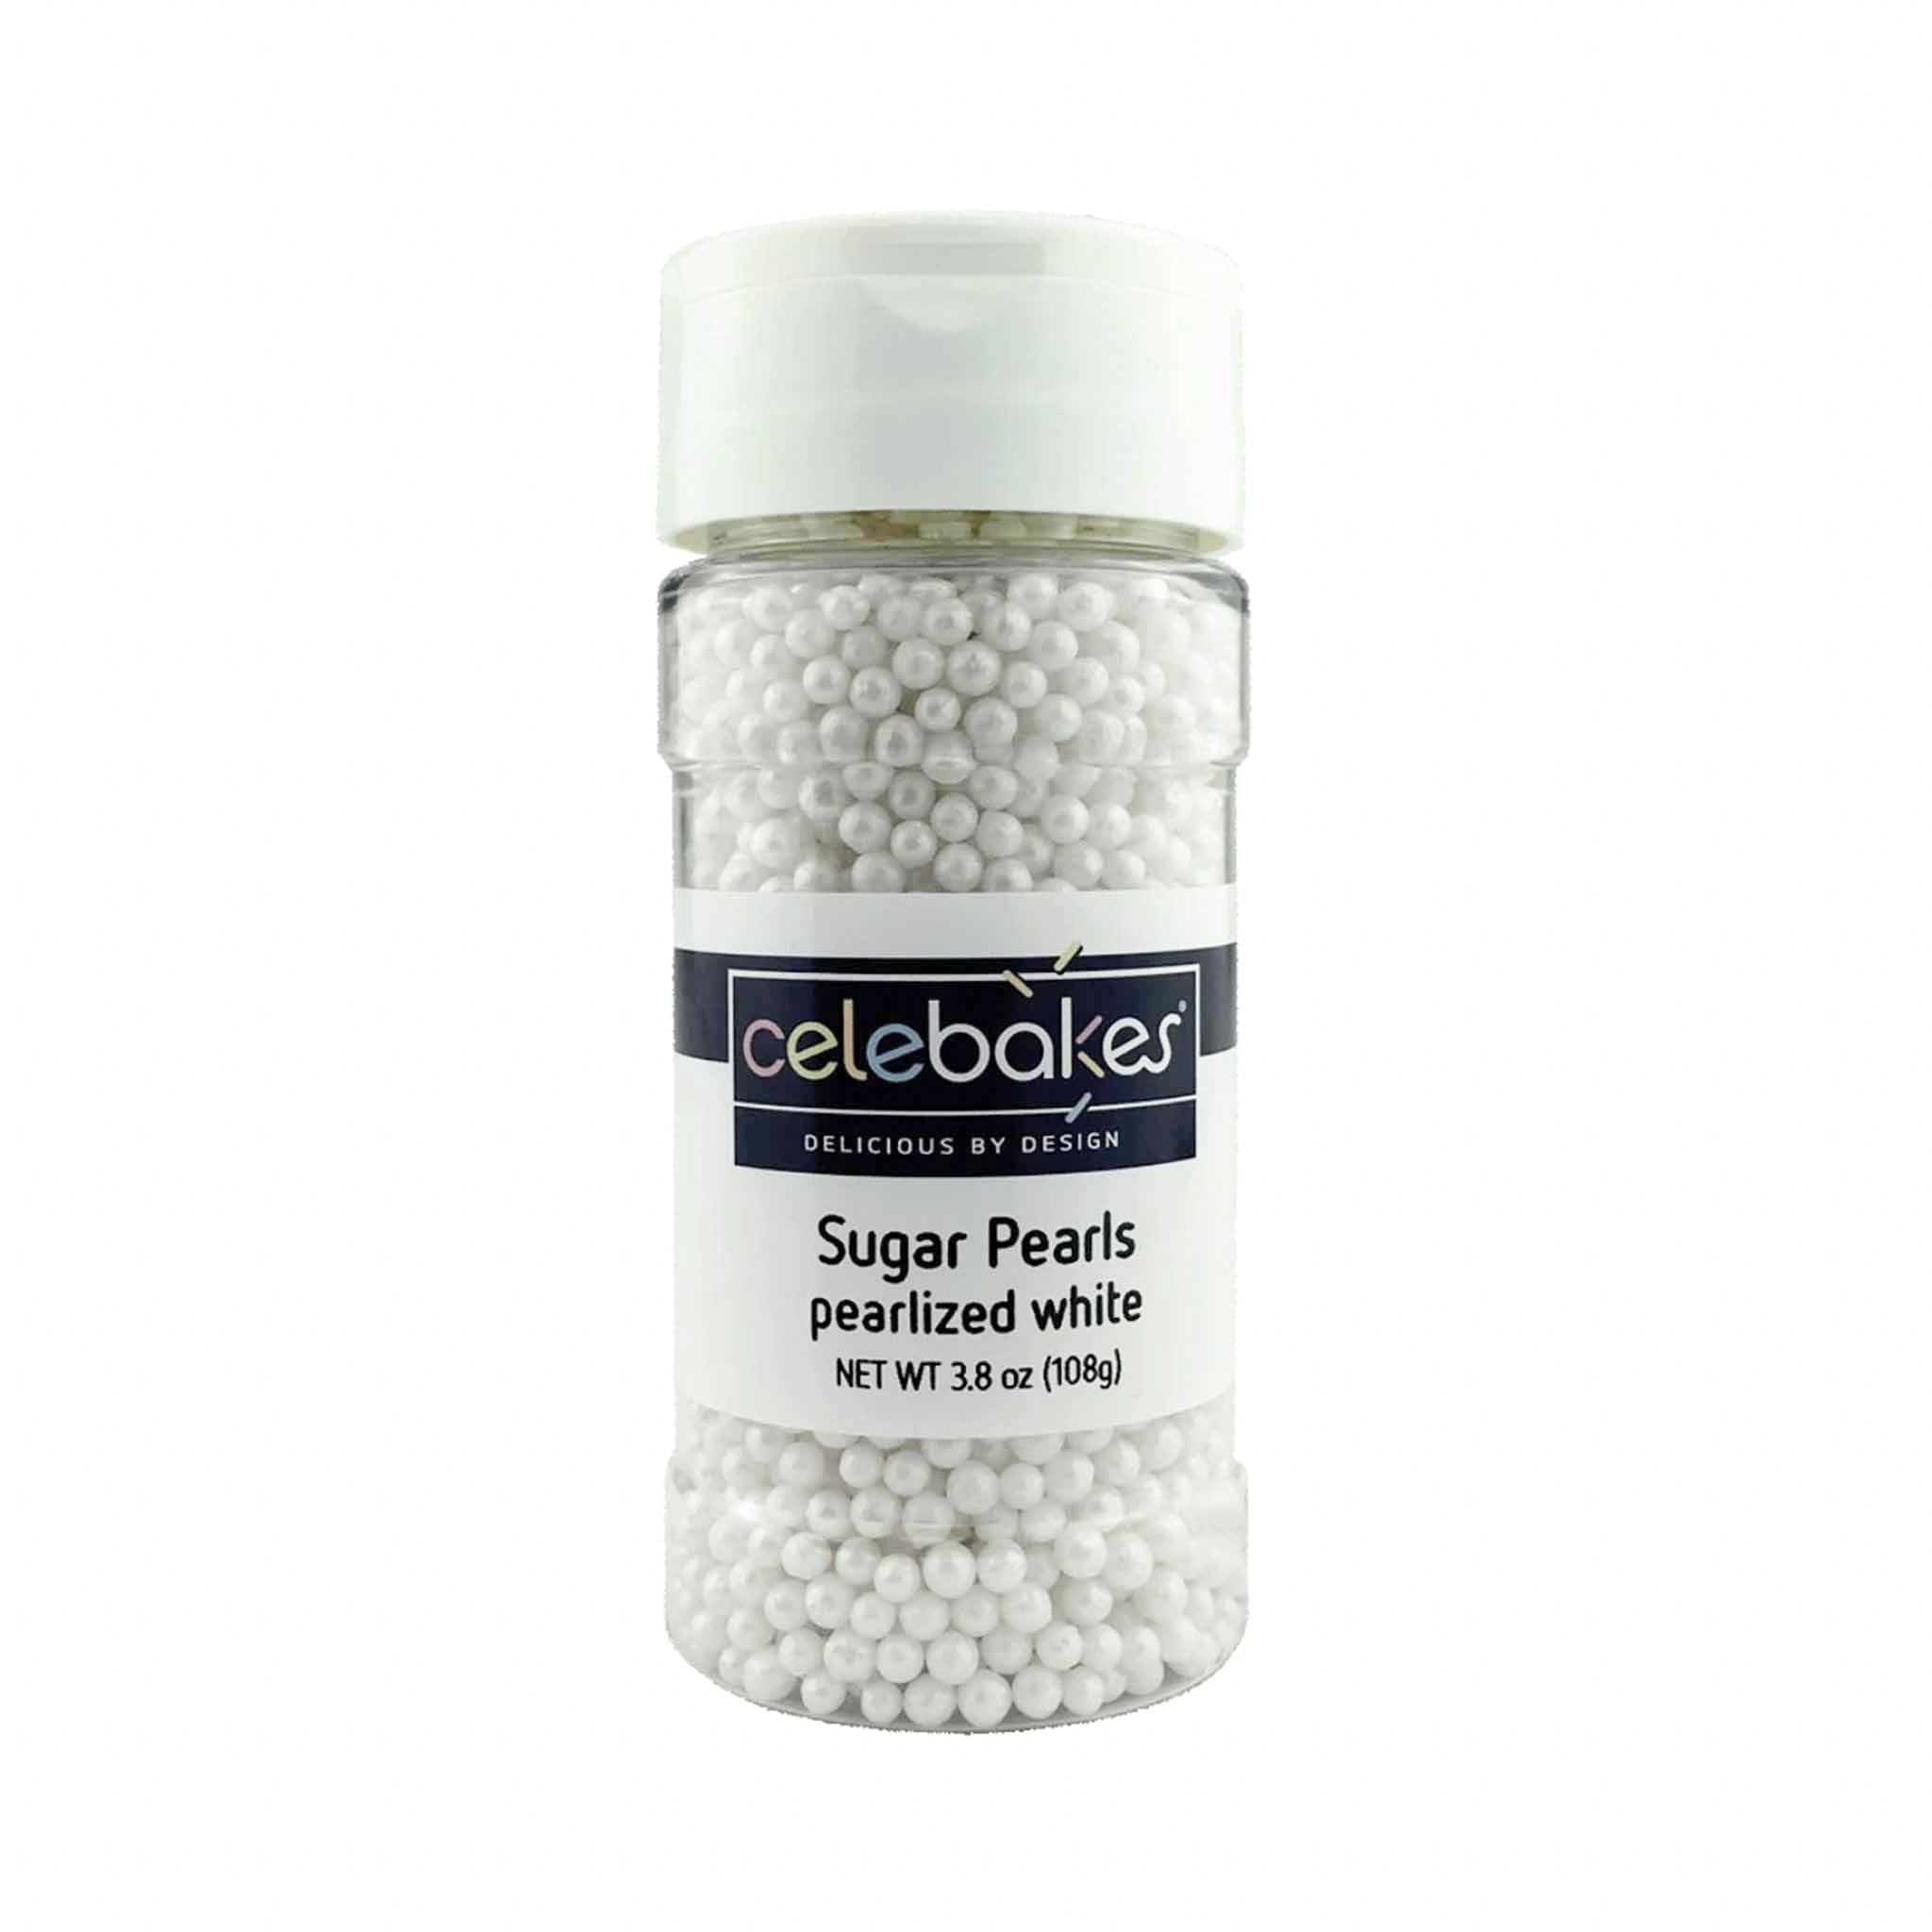 Sugar Pearls for Cake Decoration